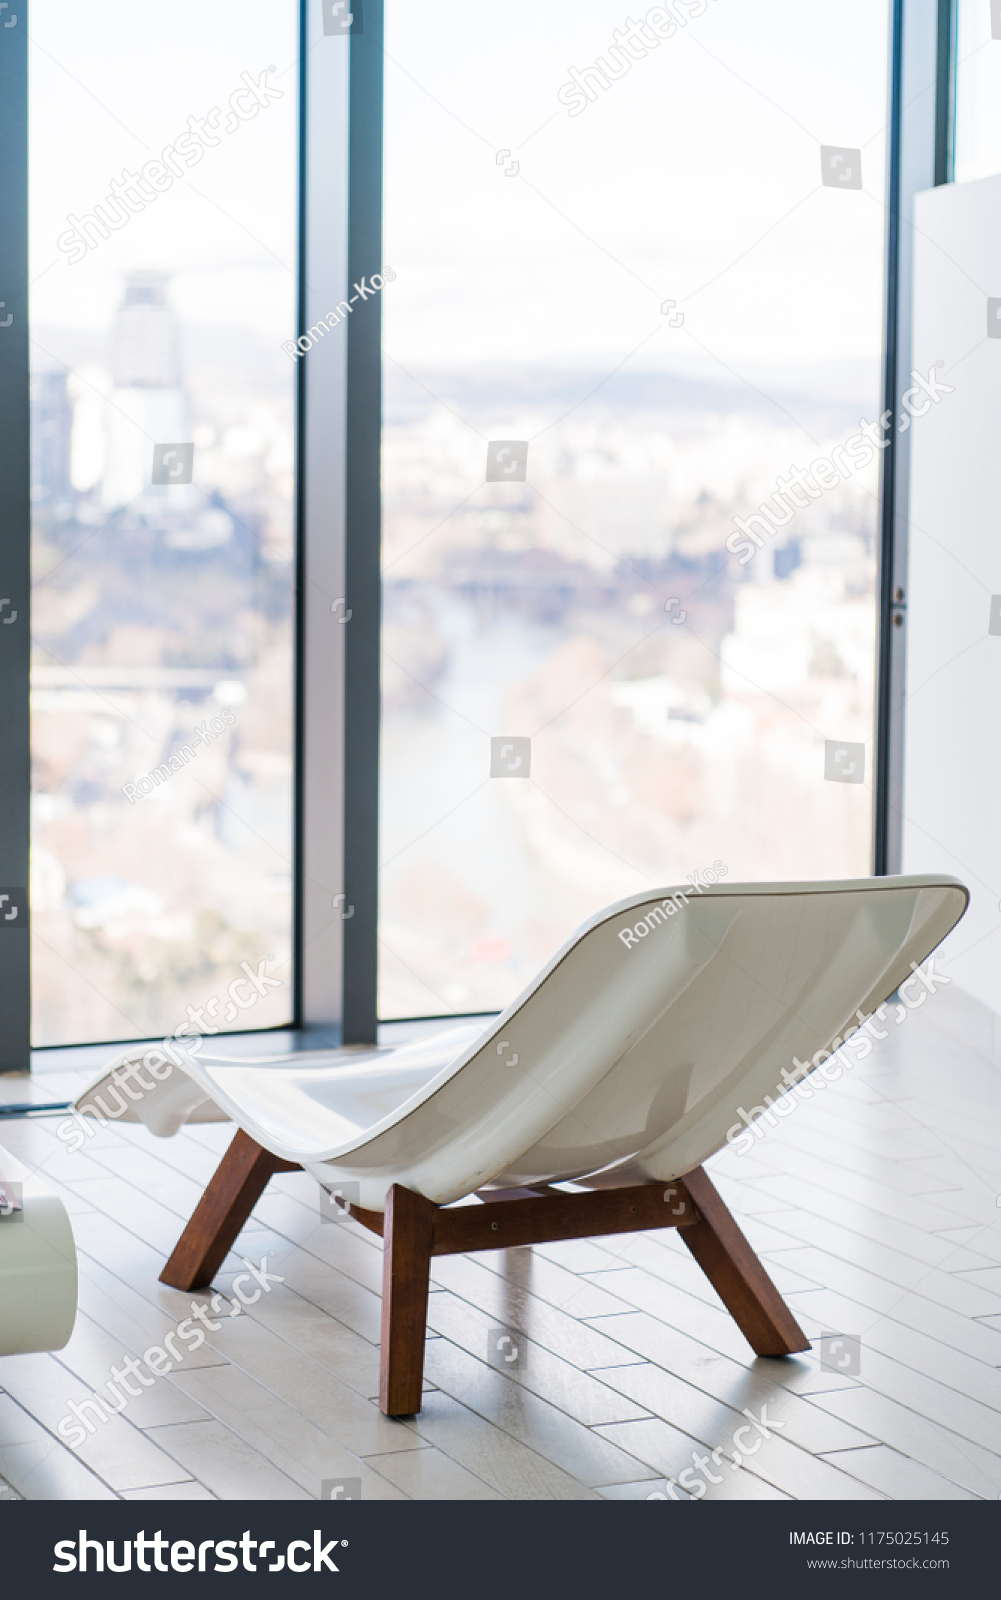 Empty White Lounge Chair Inside Tiled Stock Photo Edit Now